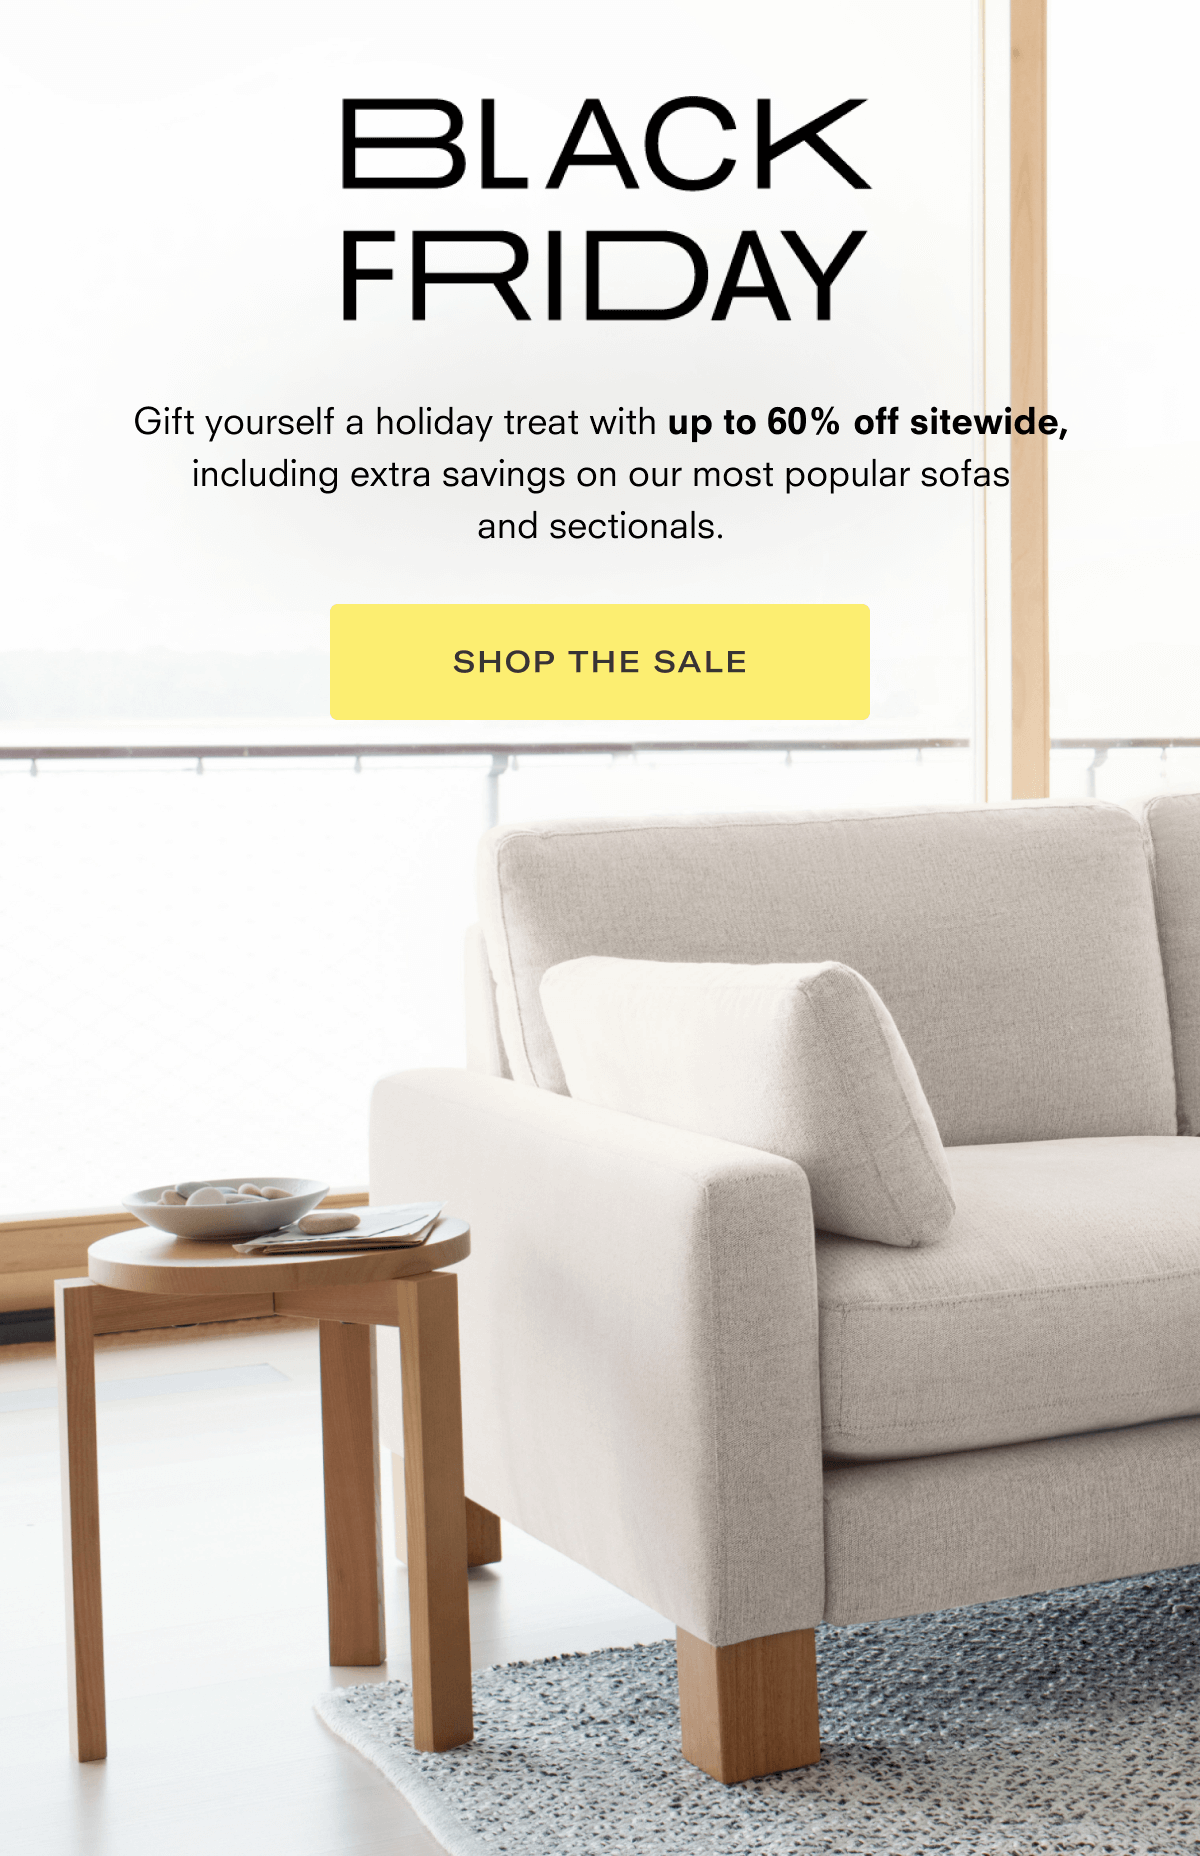 BLACK FRIDAY Gift yourself a holiday treat with up to 60% off sitewide, including extra savings on our most popular sofas and sectionals. SHOP THE SALE S S e s S e 